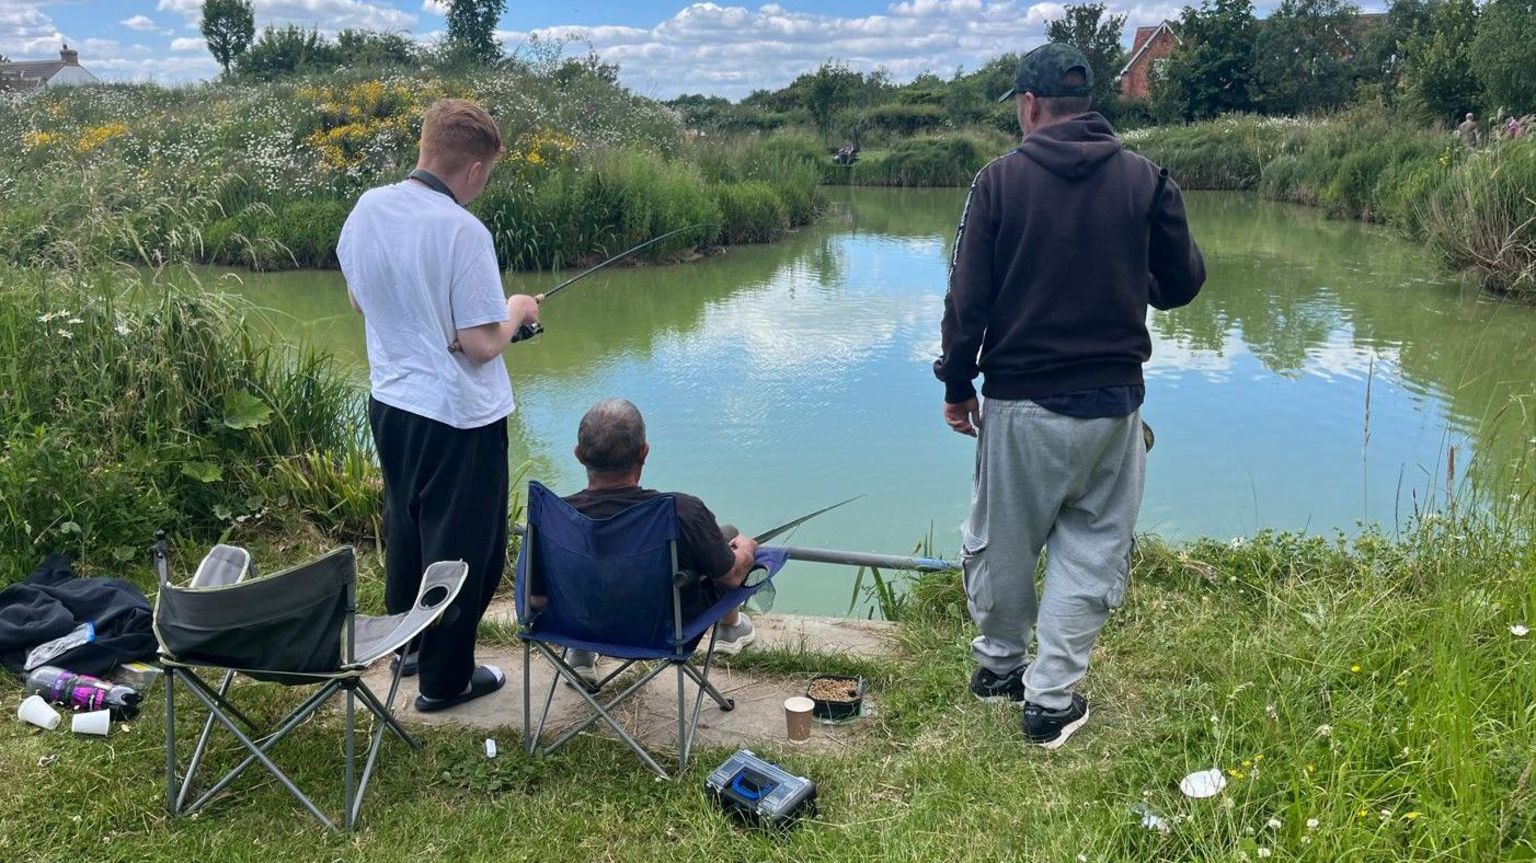 Three men fishing together at a lake, with their backs to the camera as they look out across the water. Two are standing and the one in the middle is sitting in a camping chair